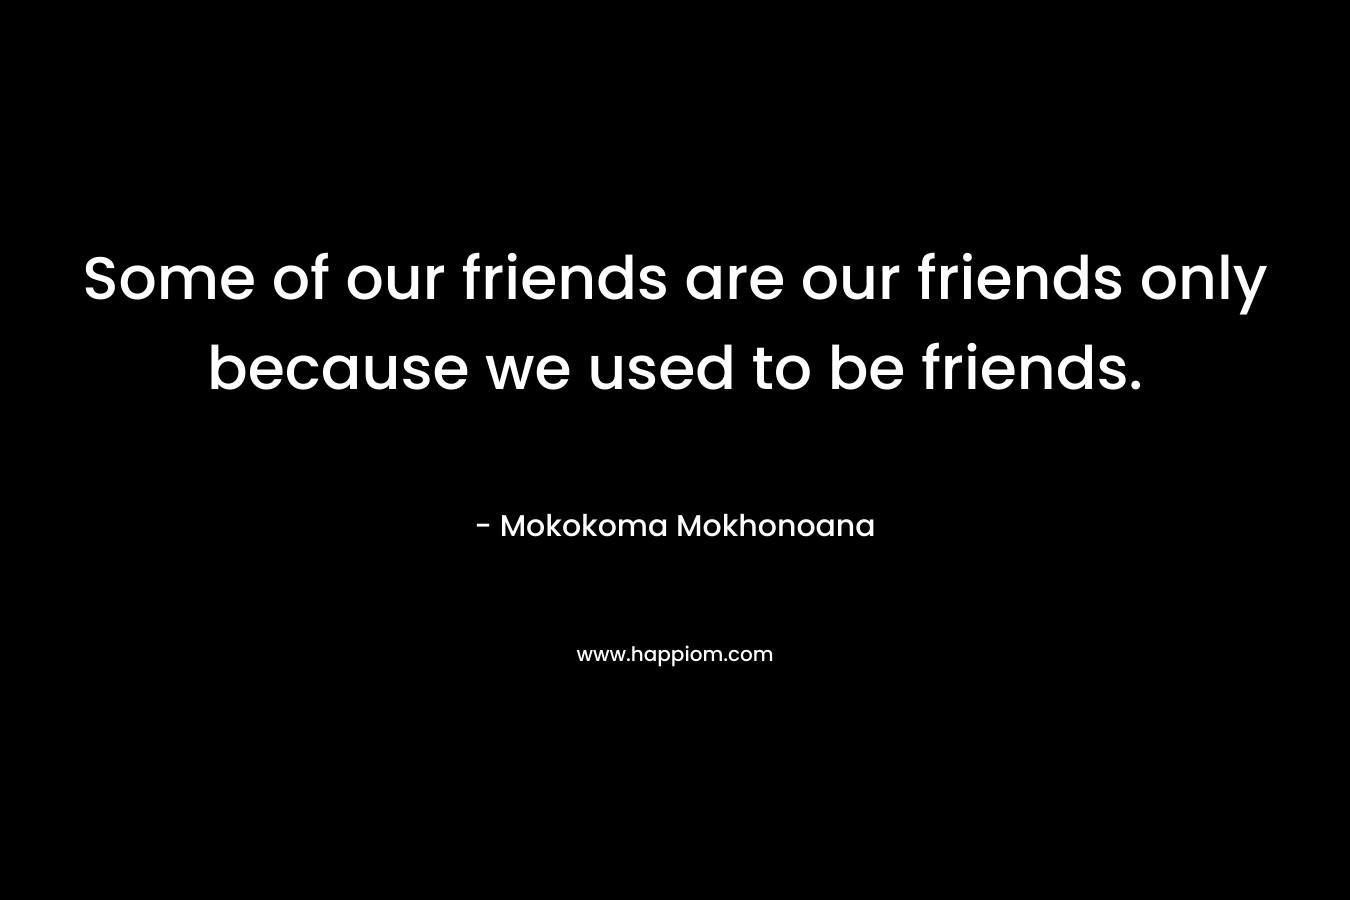 Some of our friends are our friends only because we used to be friends.